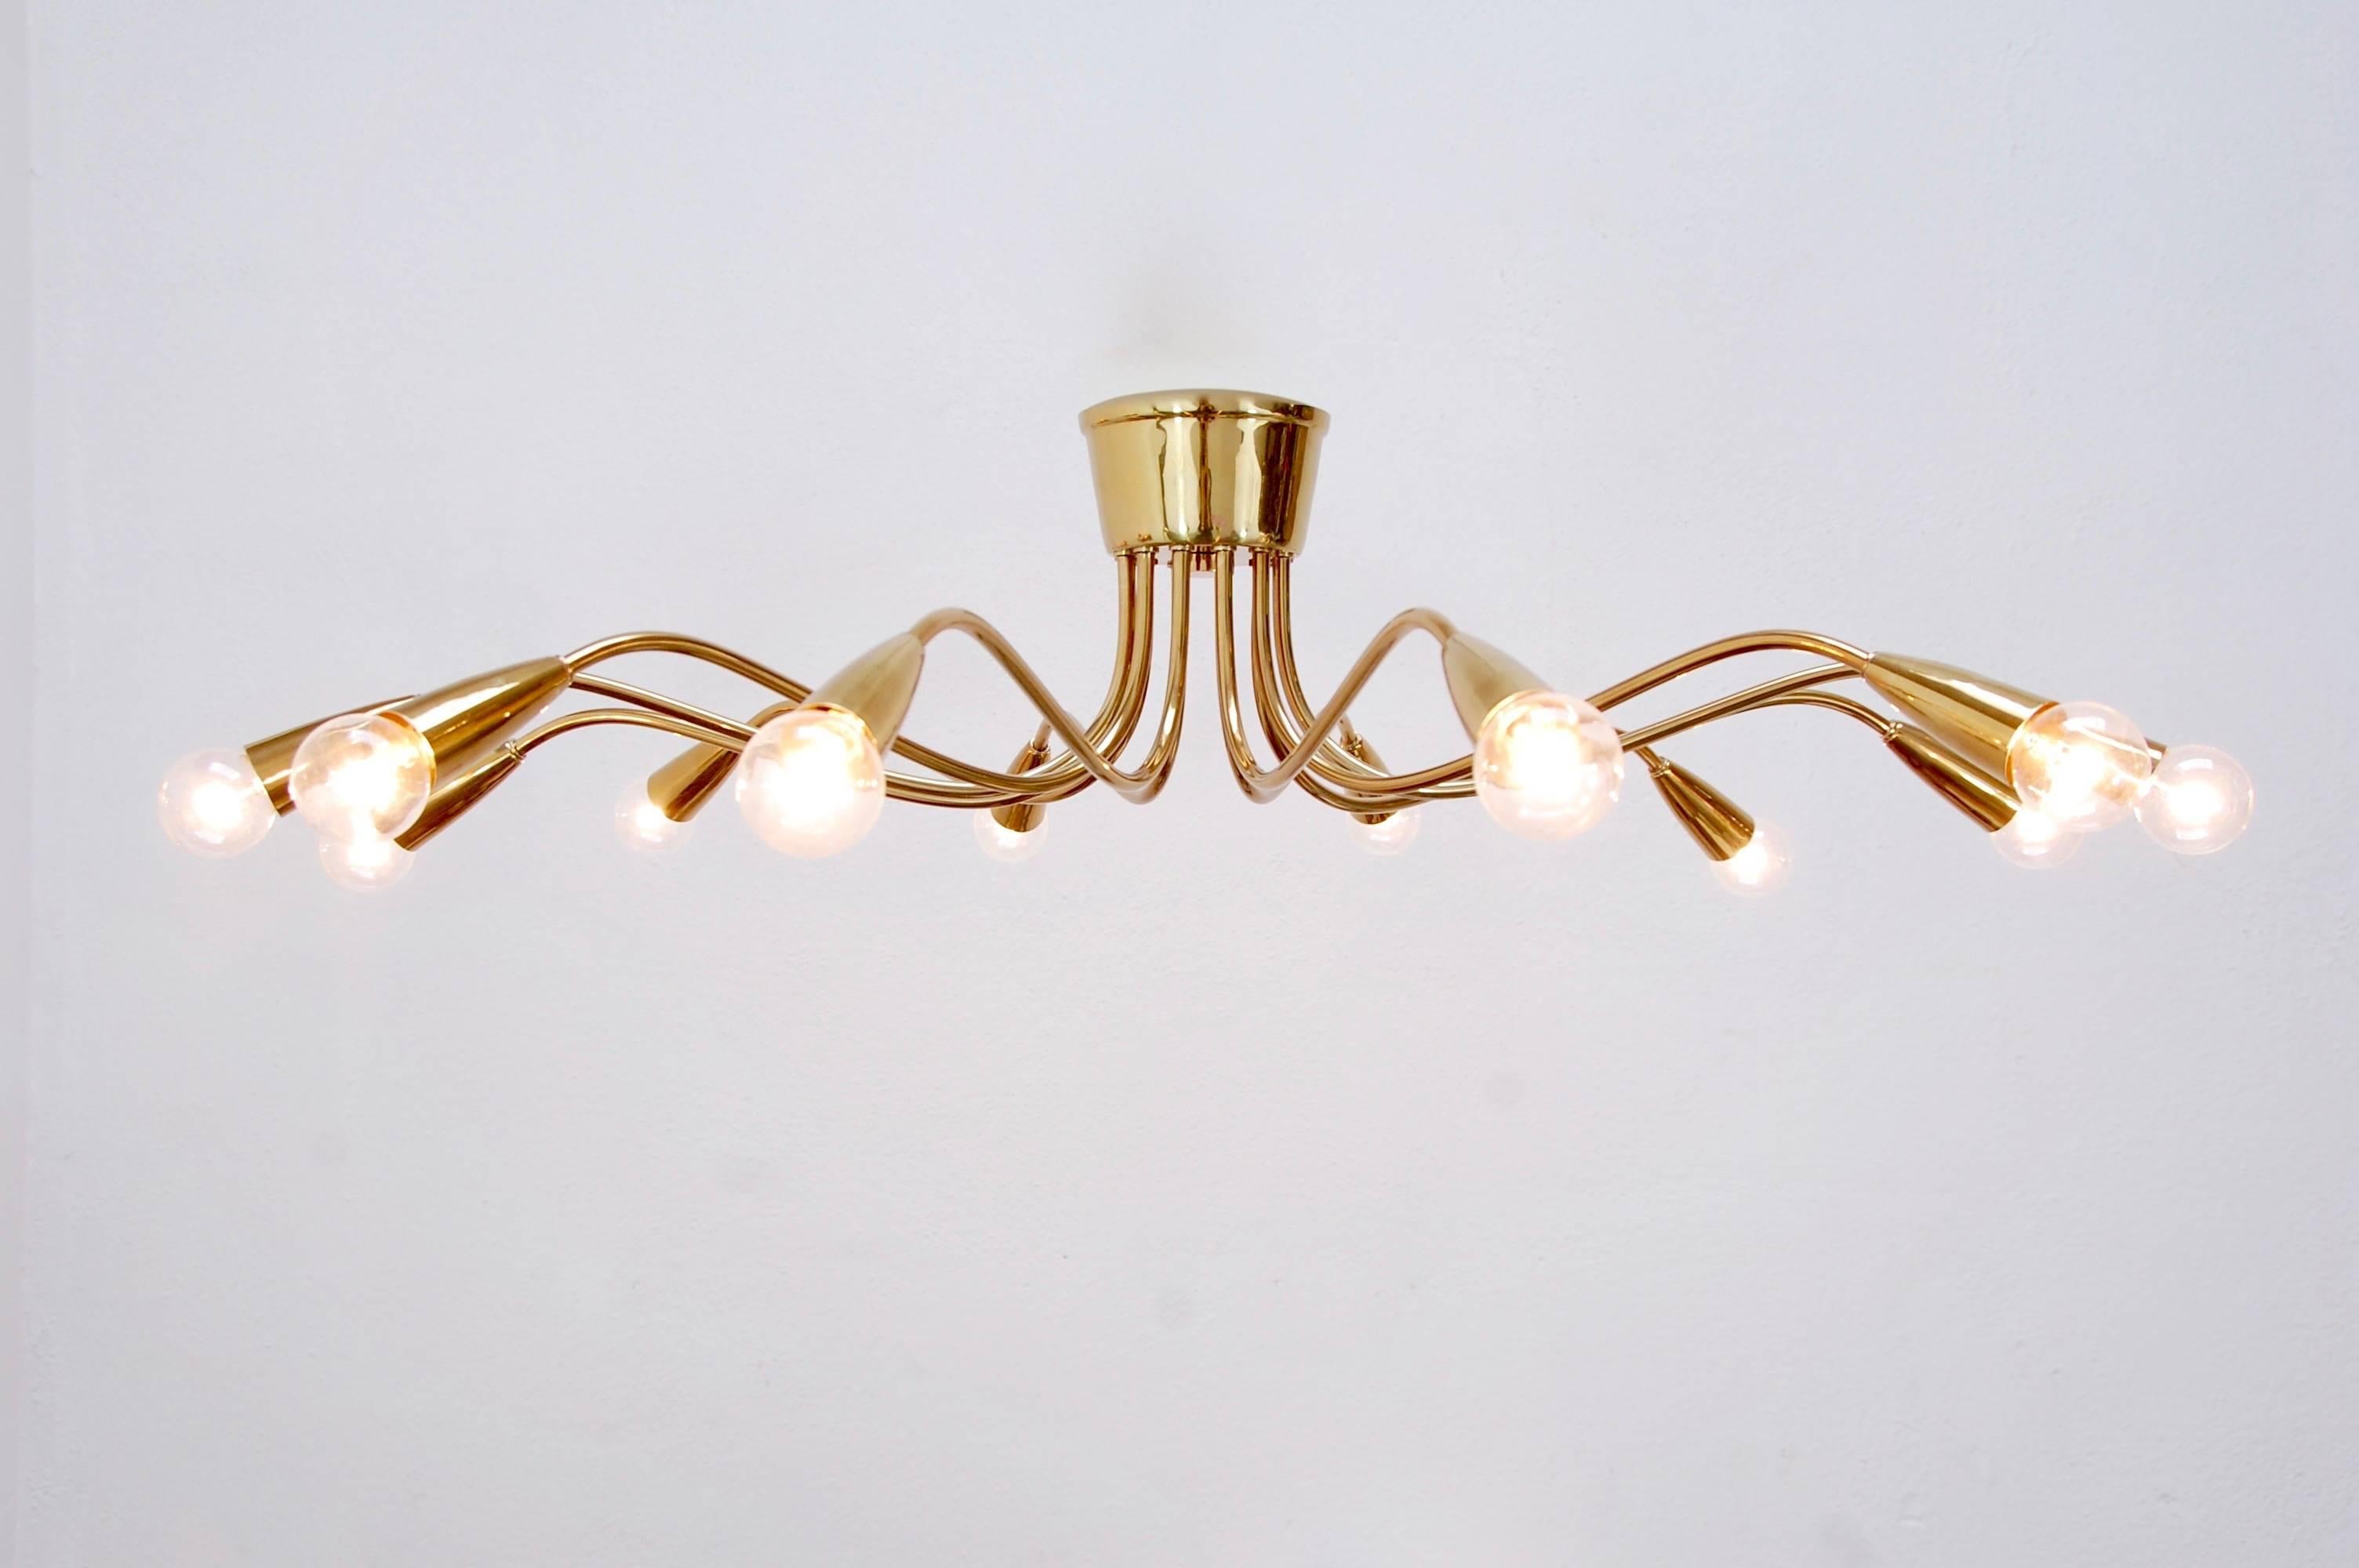 Stunning twelve-arm Italian brass flush mount chandelier from 1950s, Italy. Restored and rewired for use in the US. Patina lacquered brass finish. Candelabra based sockets.